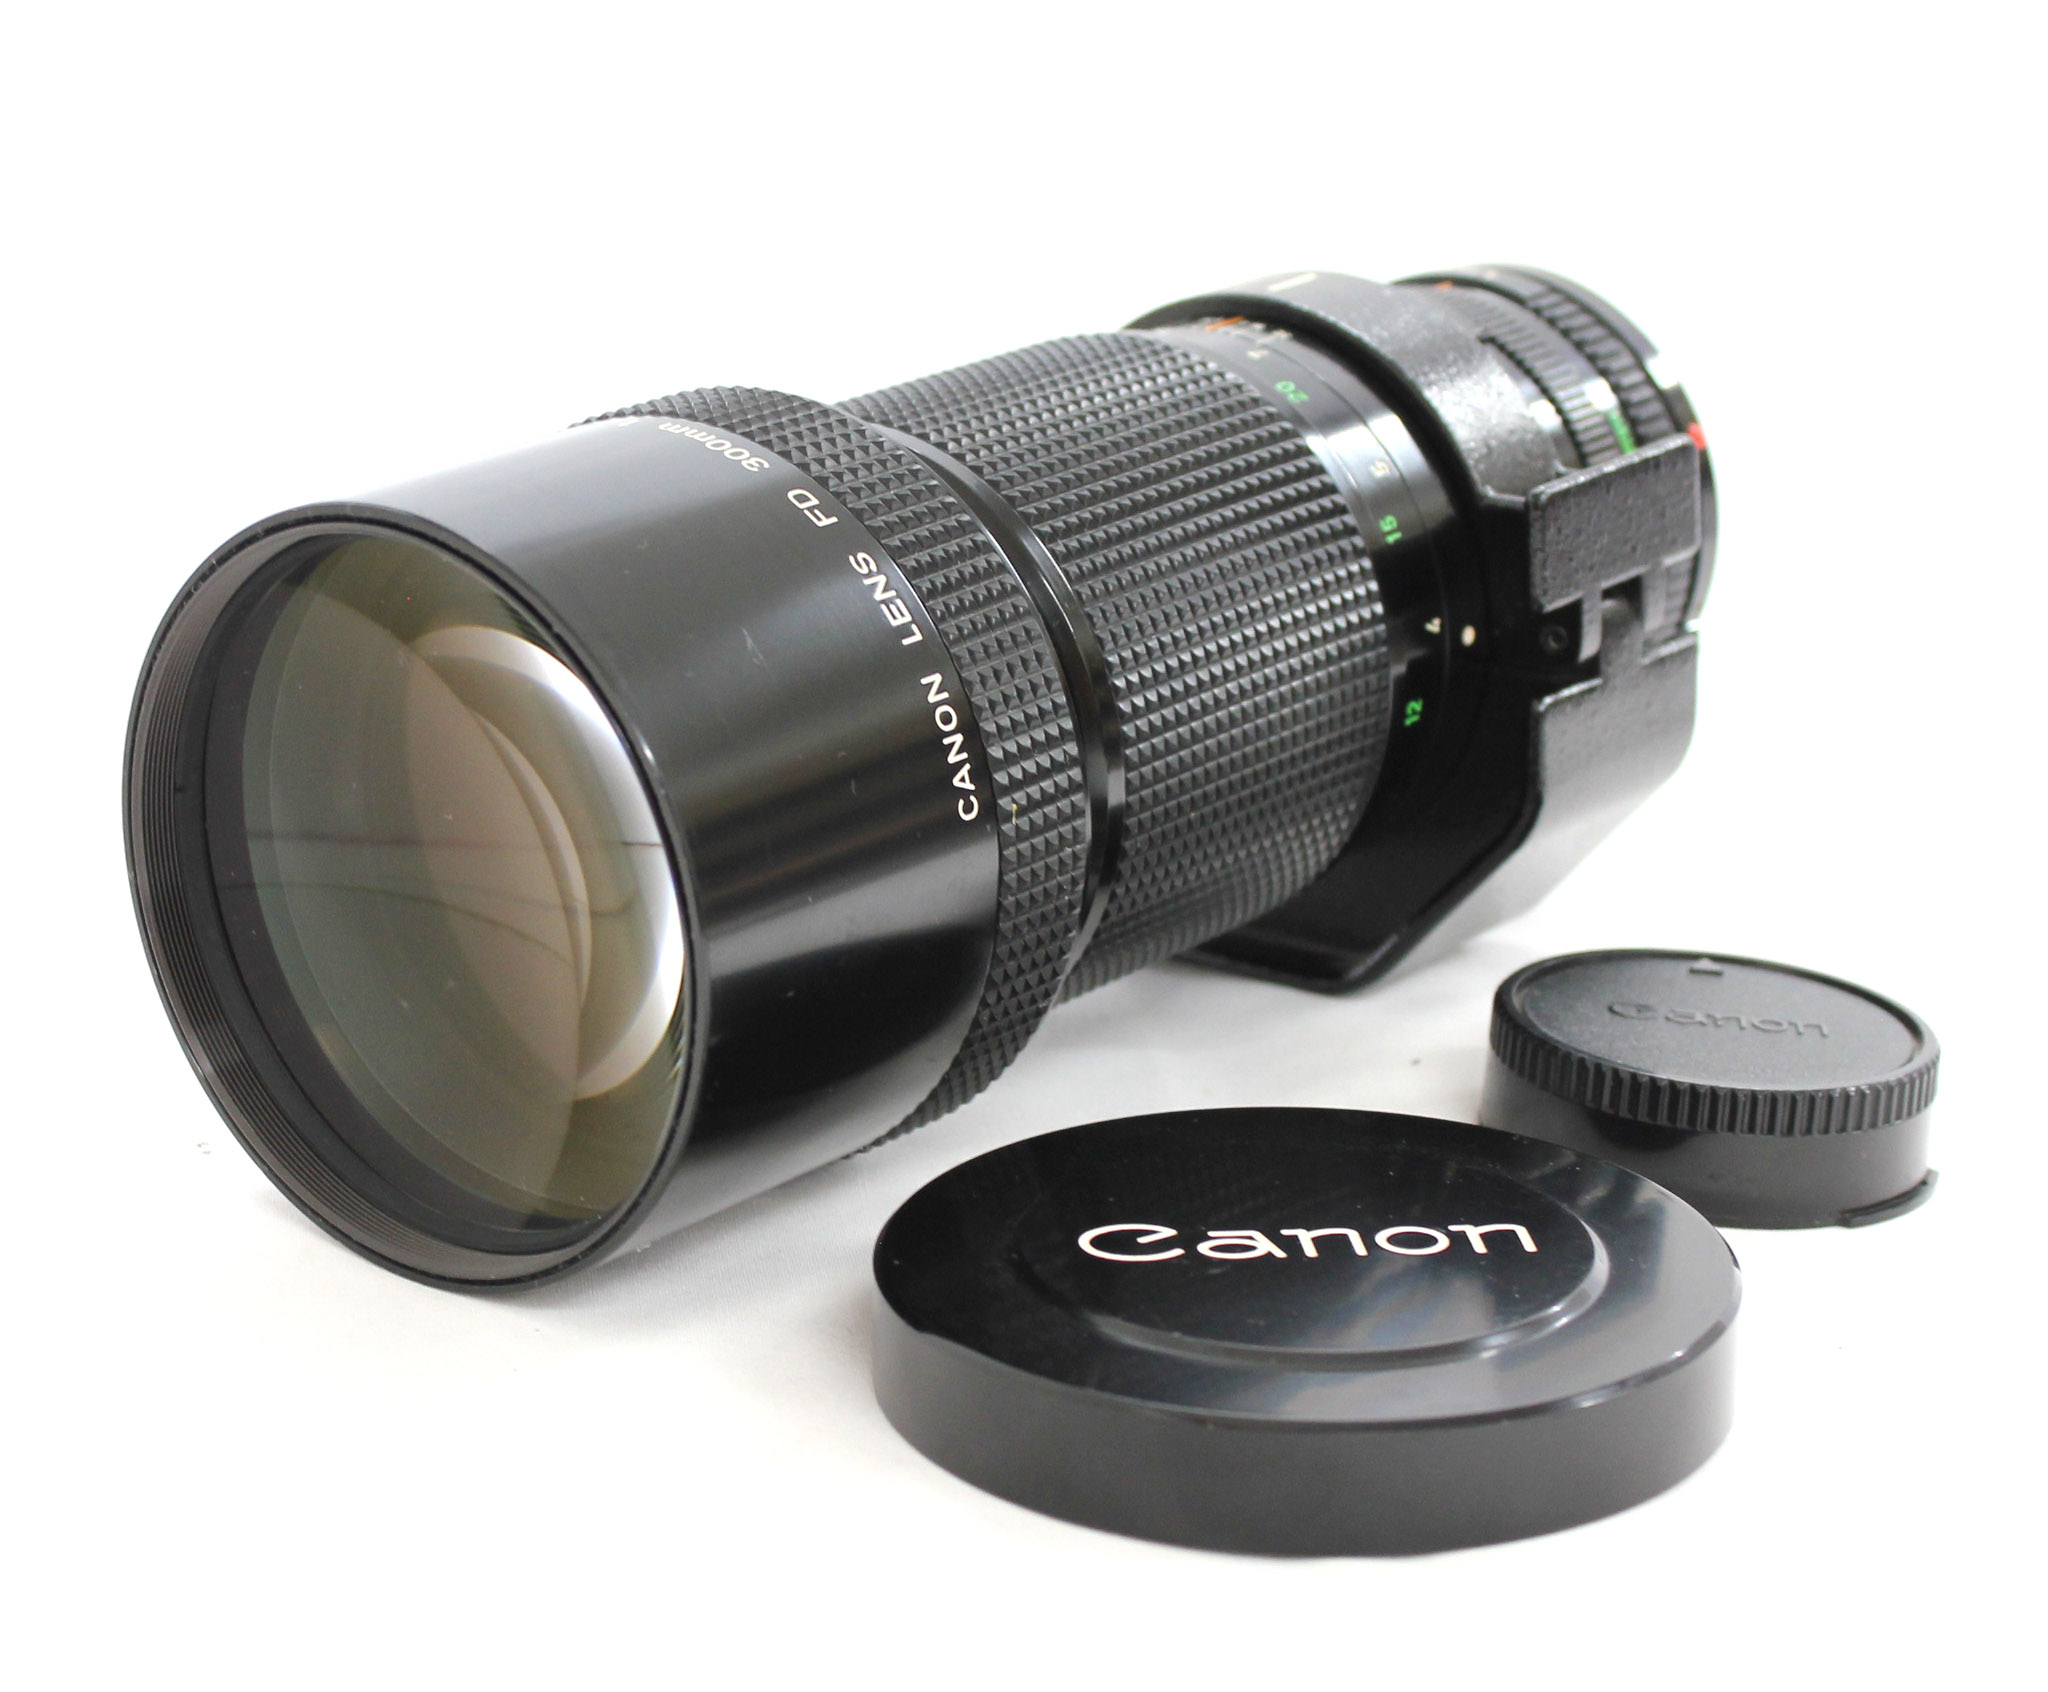 Japan Used Camera Shop | [Excellent+++++] Canon New FD NFD 300mm F/4 MF Telephoto Lens from Japan